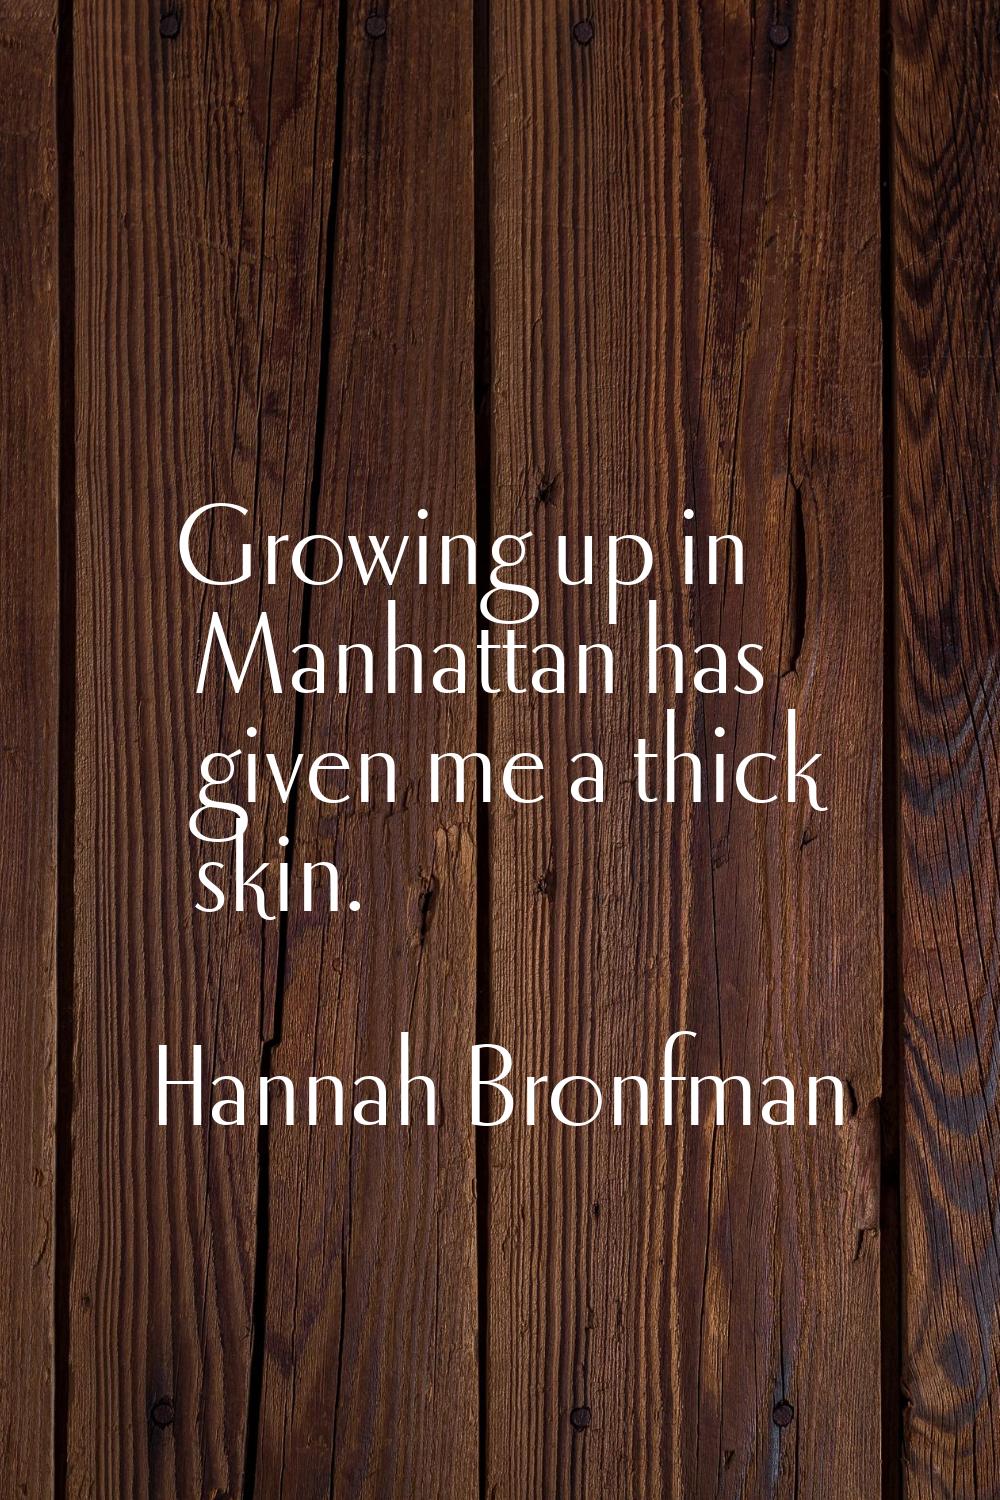 Growing up in Manhattan has given me a thick skin.